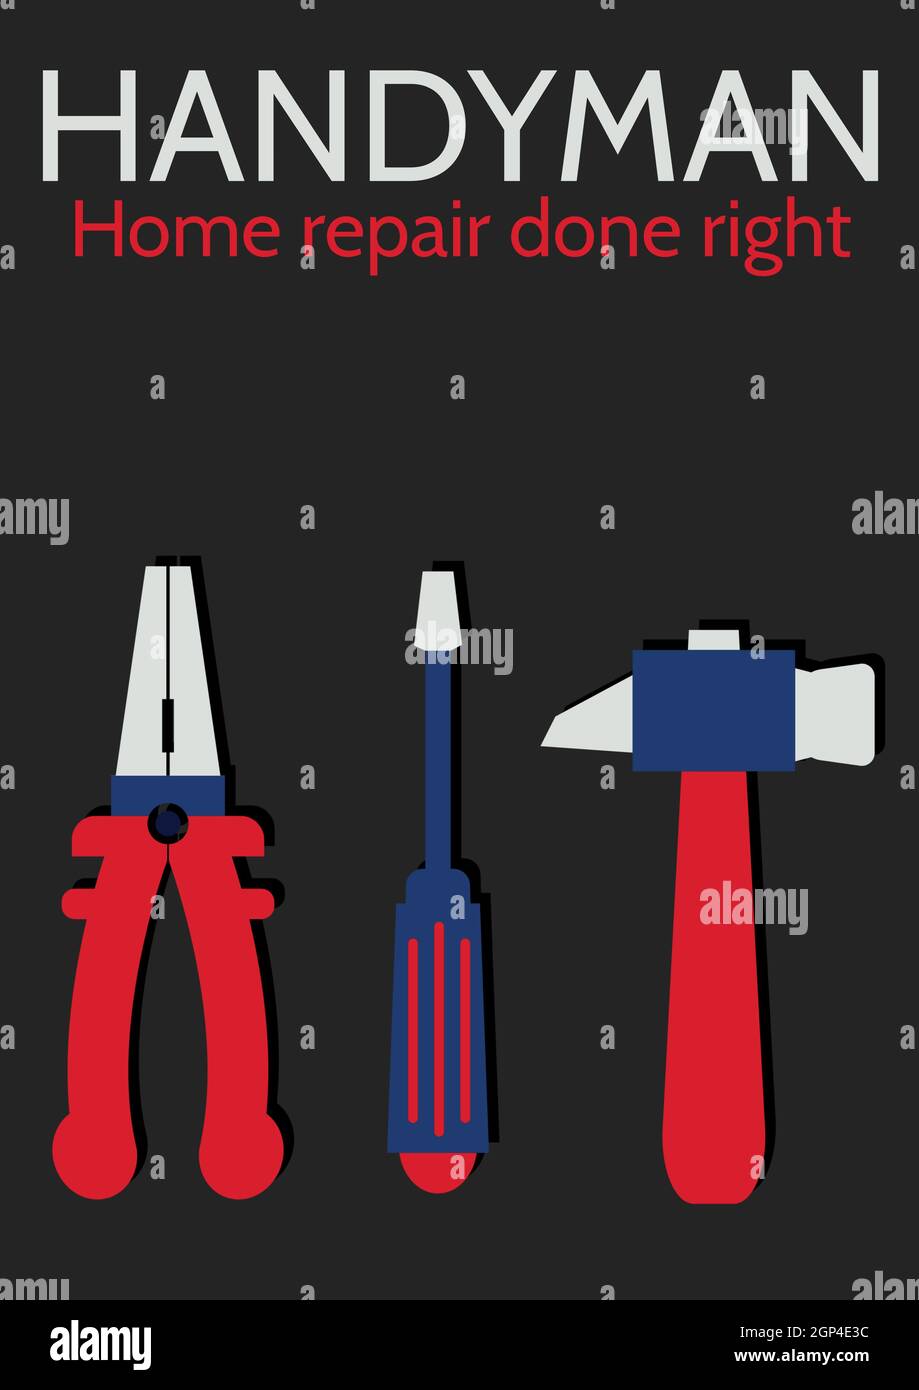 Composition of handyman text over tools icons on black background Stock Photo